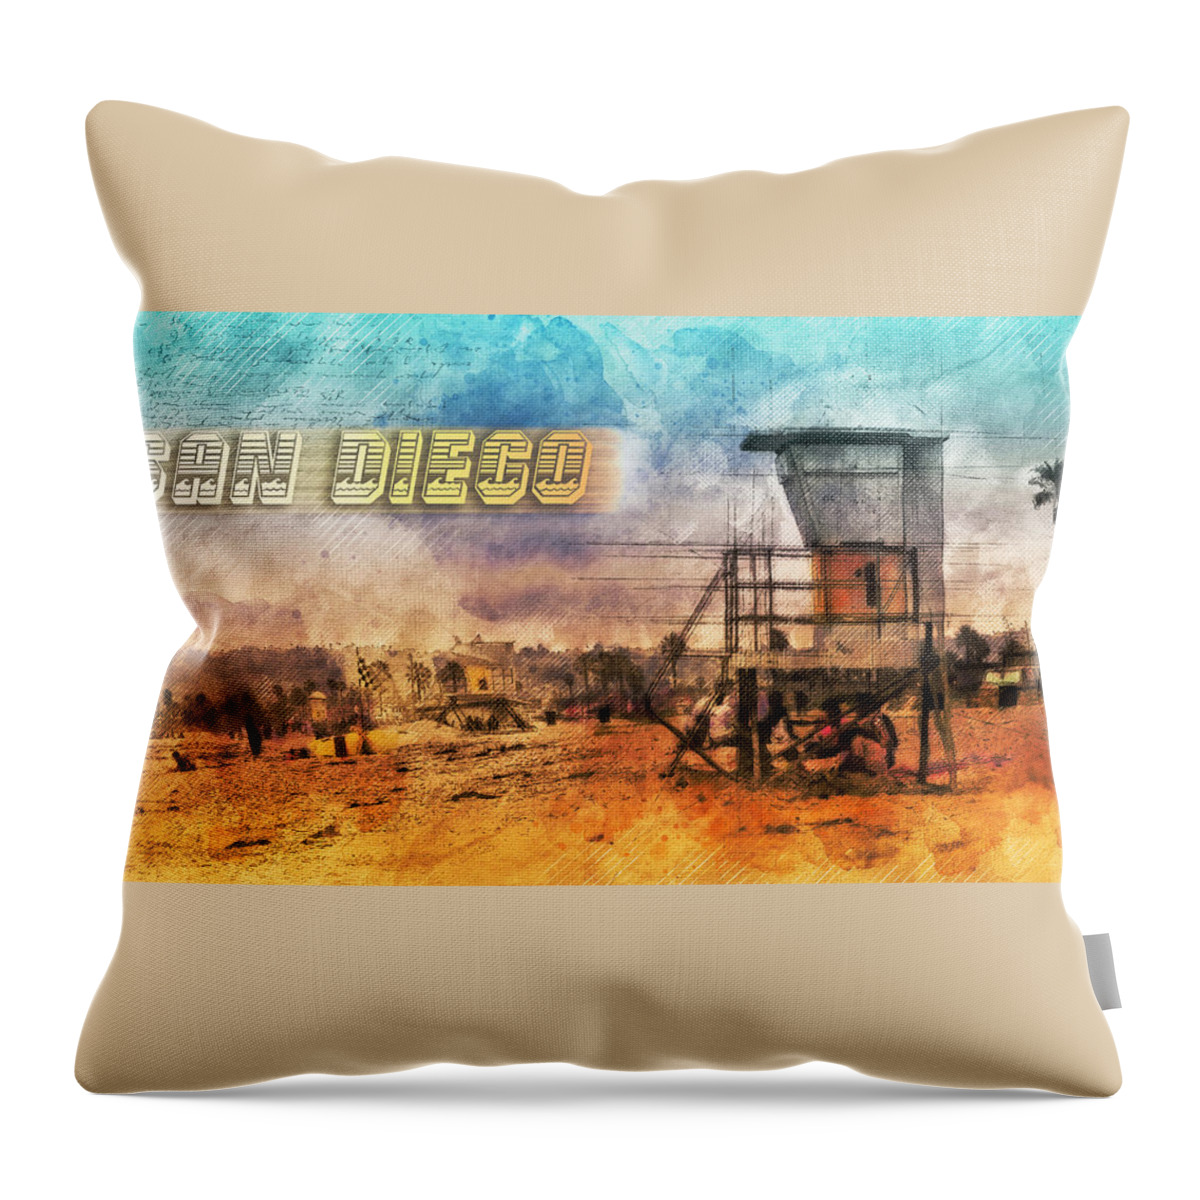 San Diego Throw Pillow featuring the mixed media San Diego Lifeguard Tower by Bryant Coffey